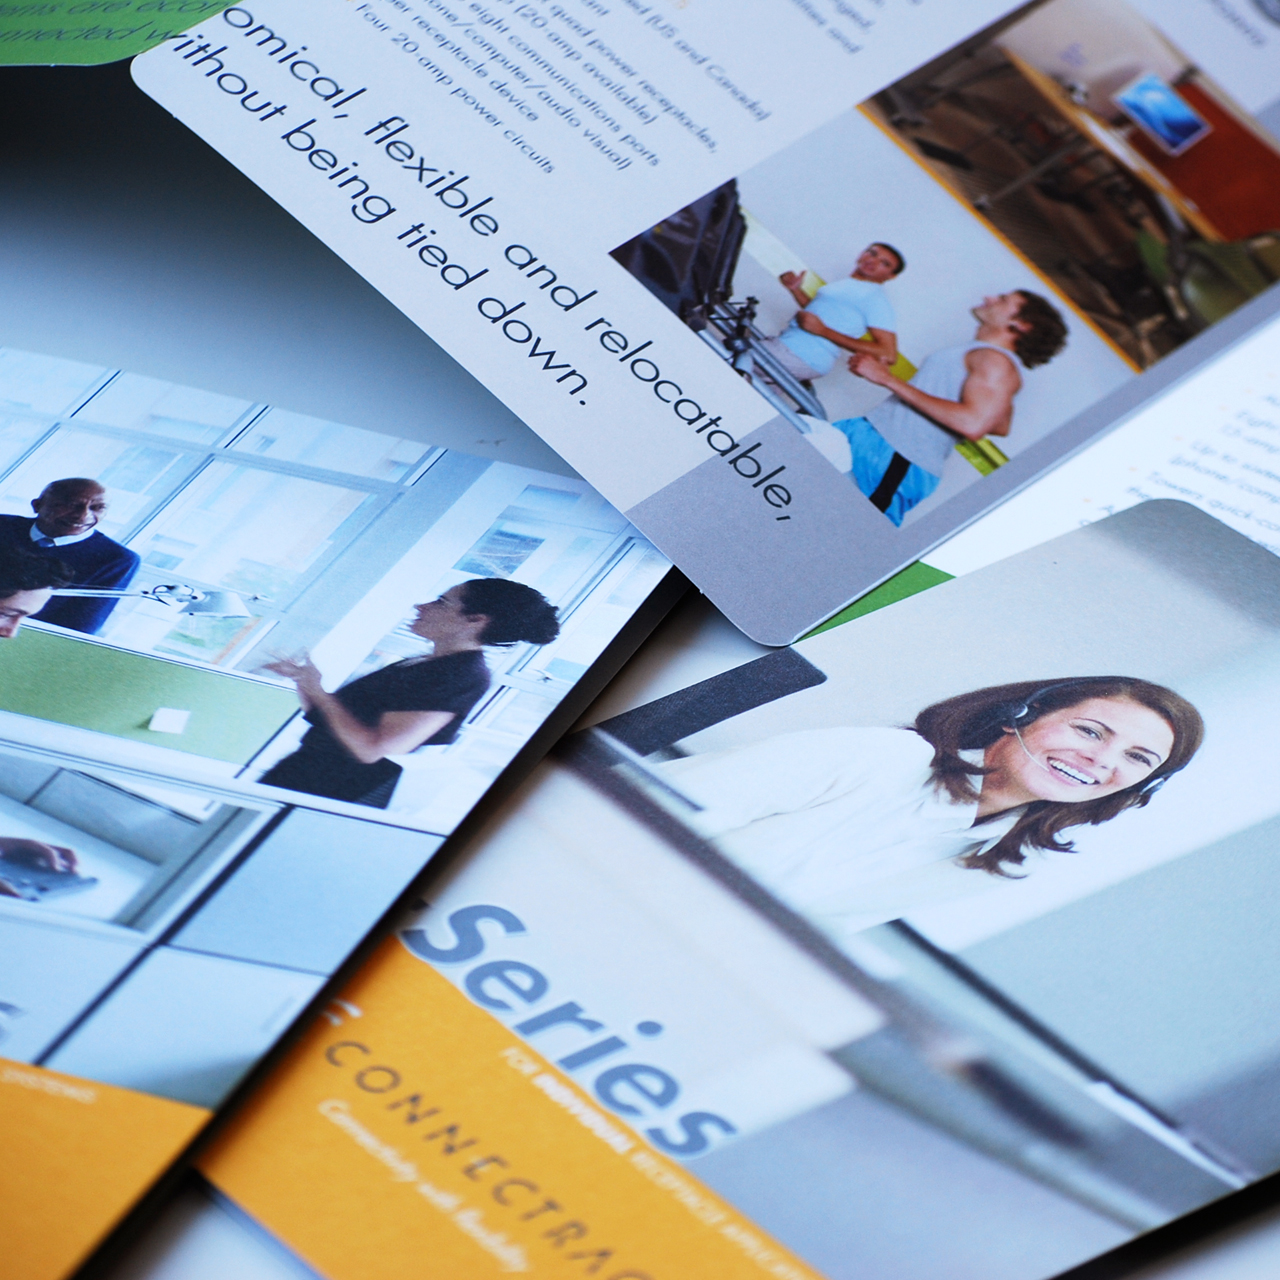 An image of Connectrac's product brochure designs